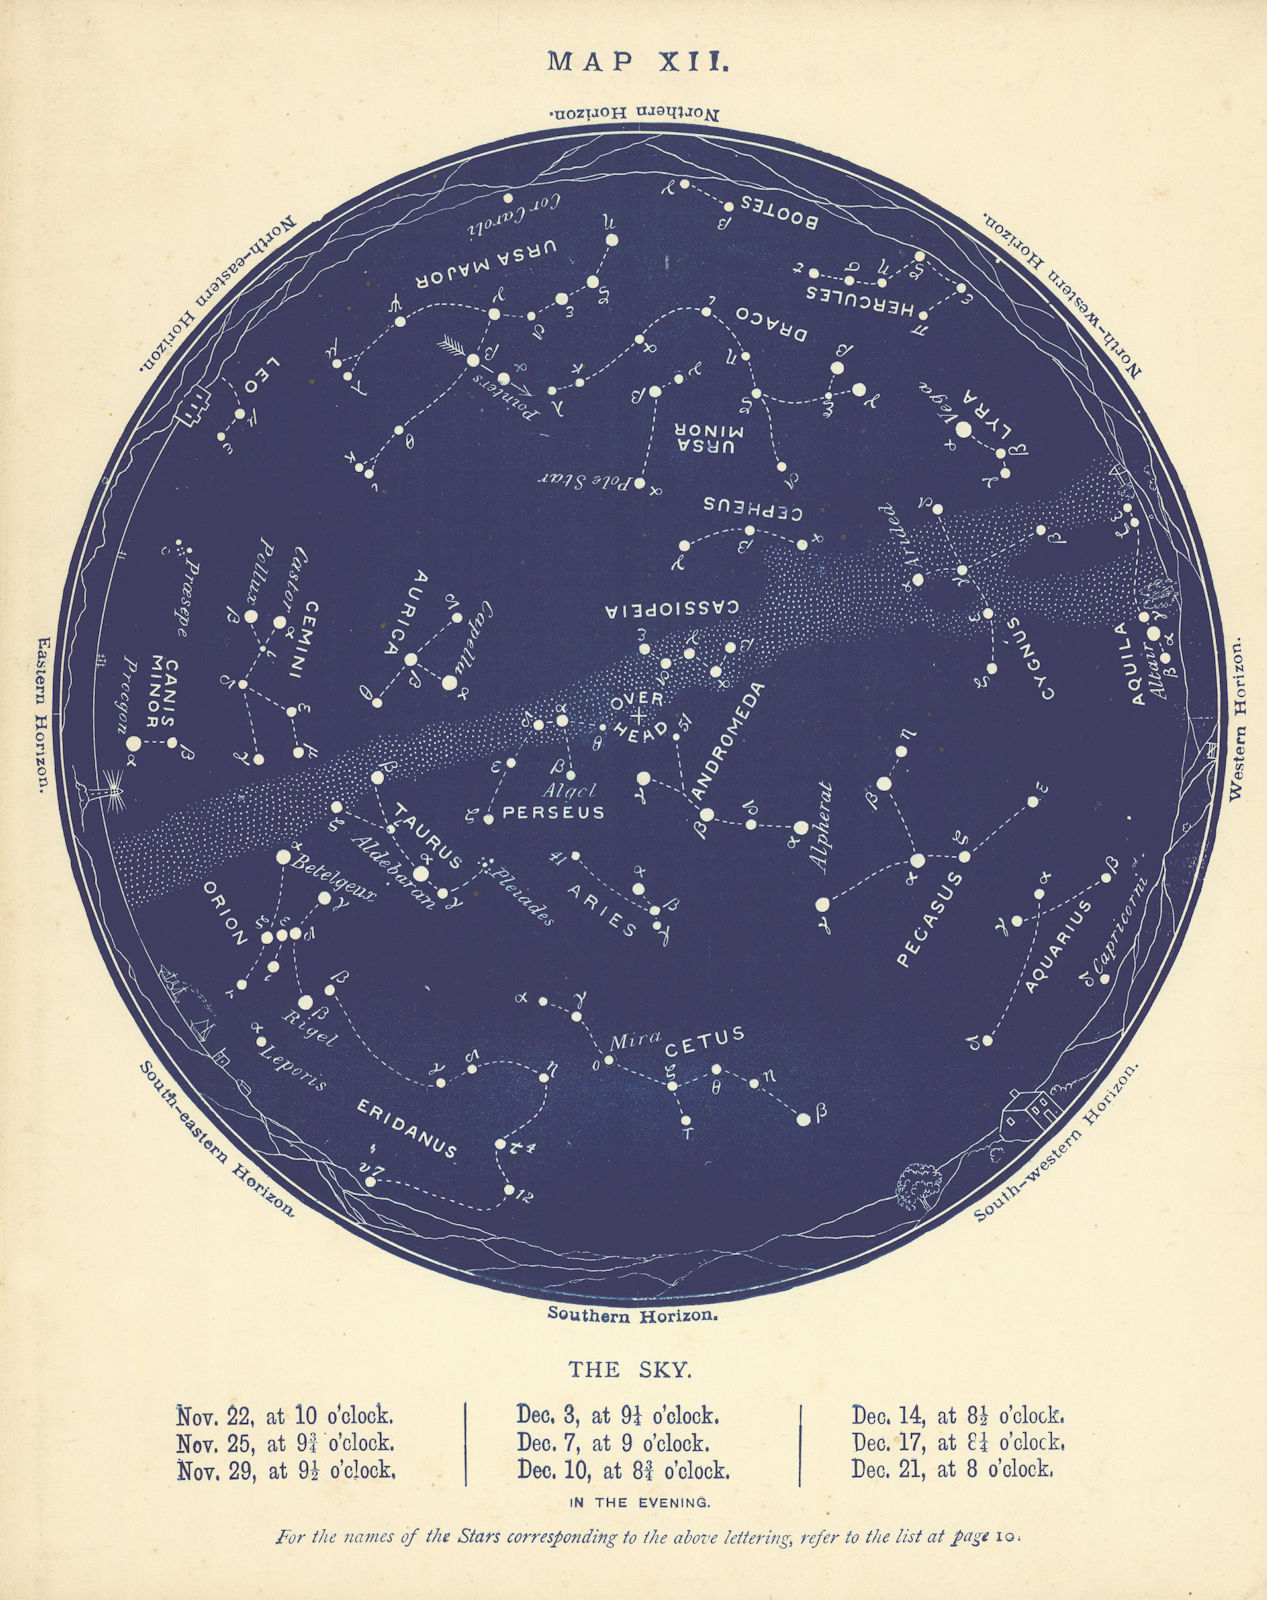 STAR MAP XII. The Night Sky. November-December. Astronomy. PROCTOR 1896